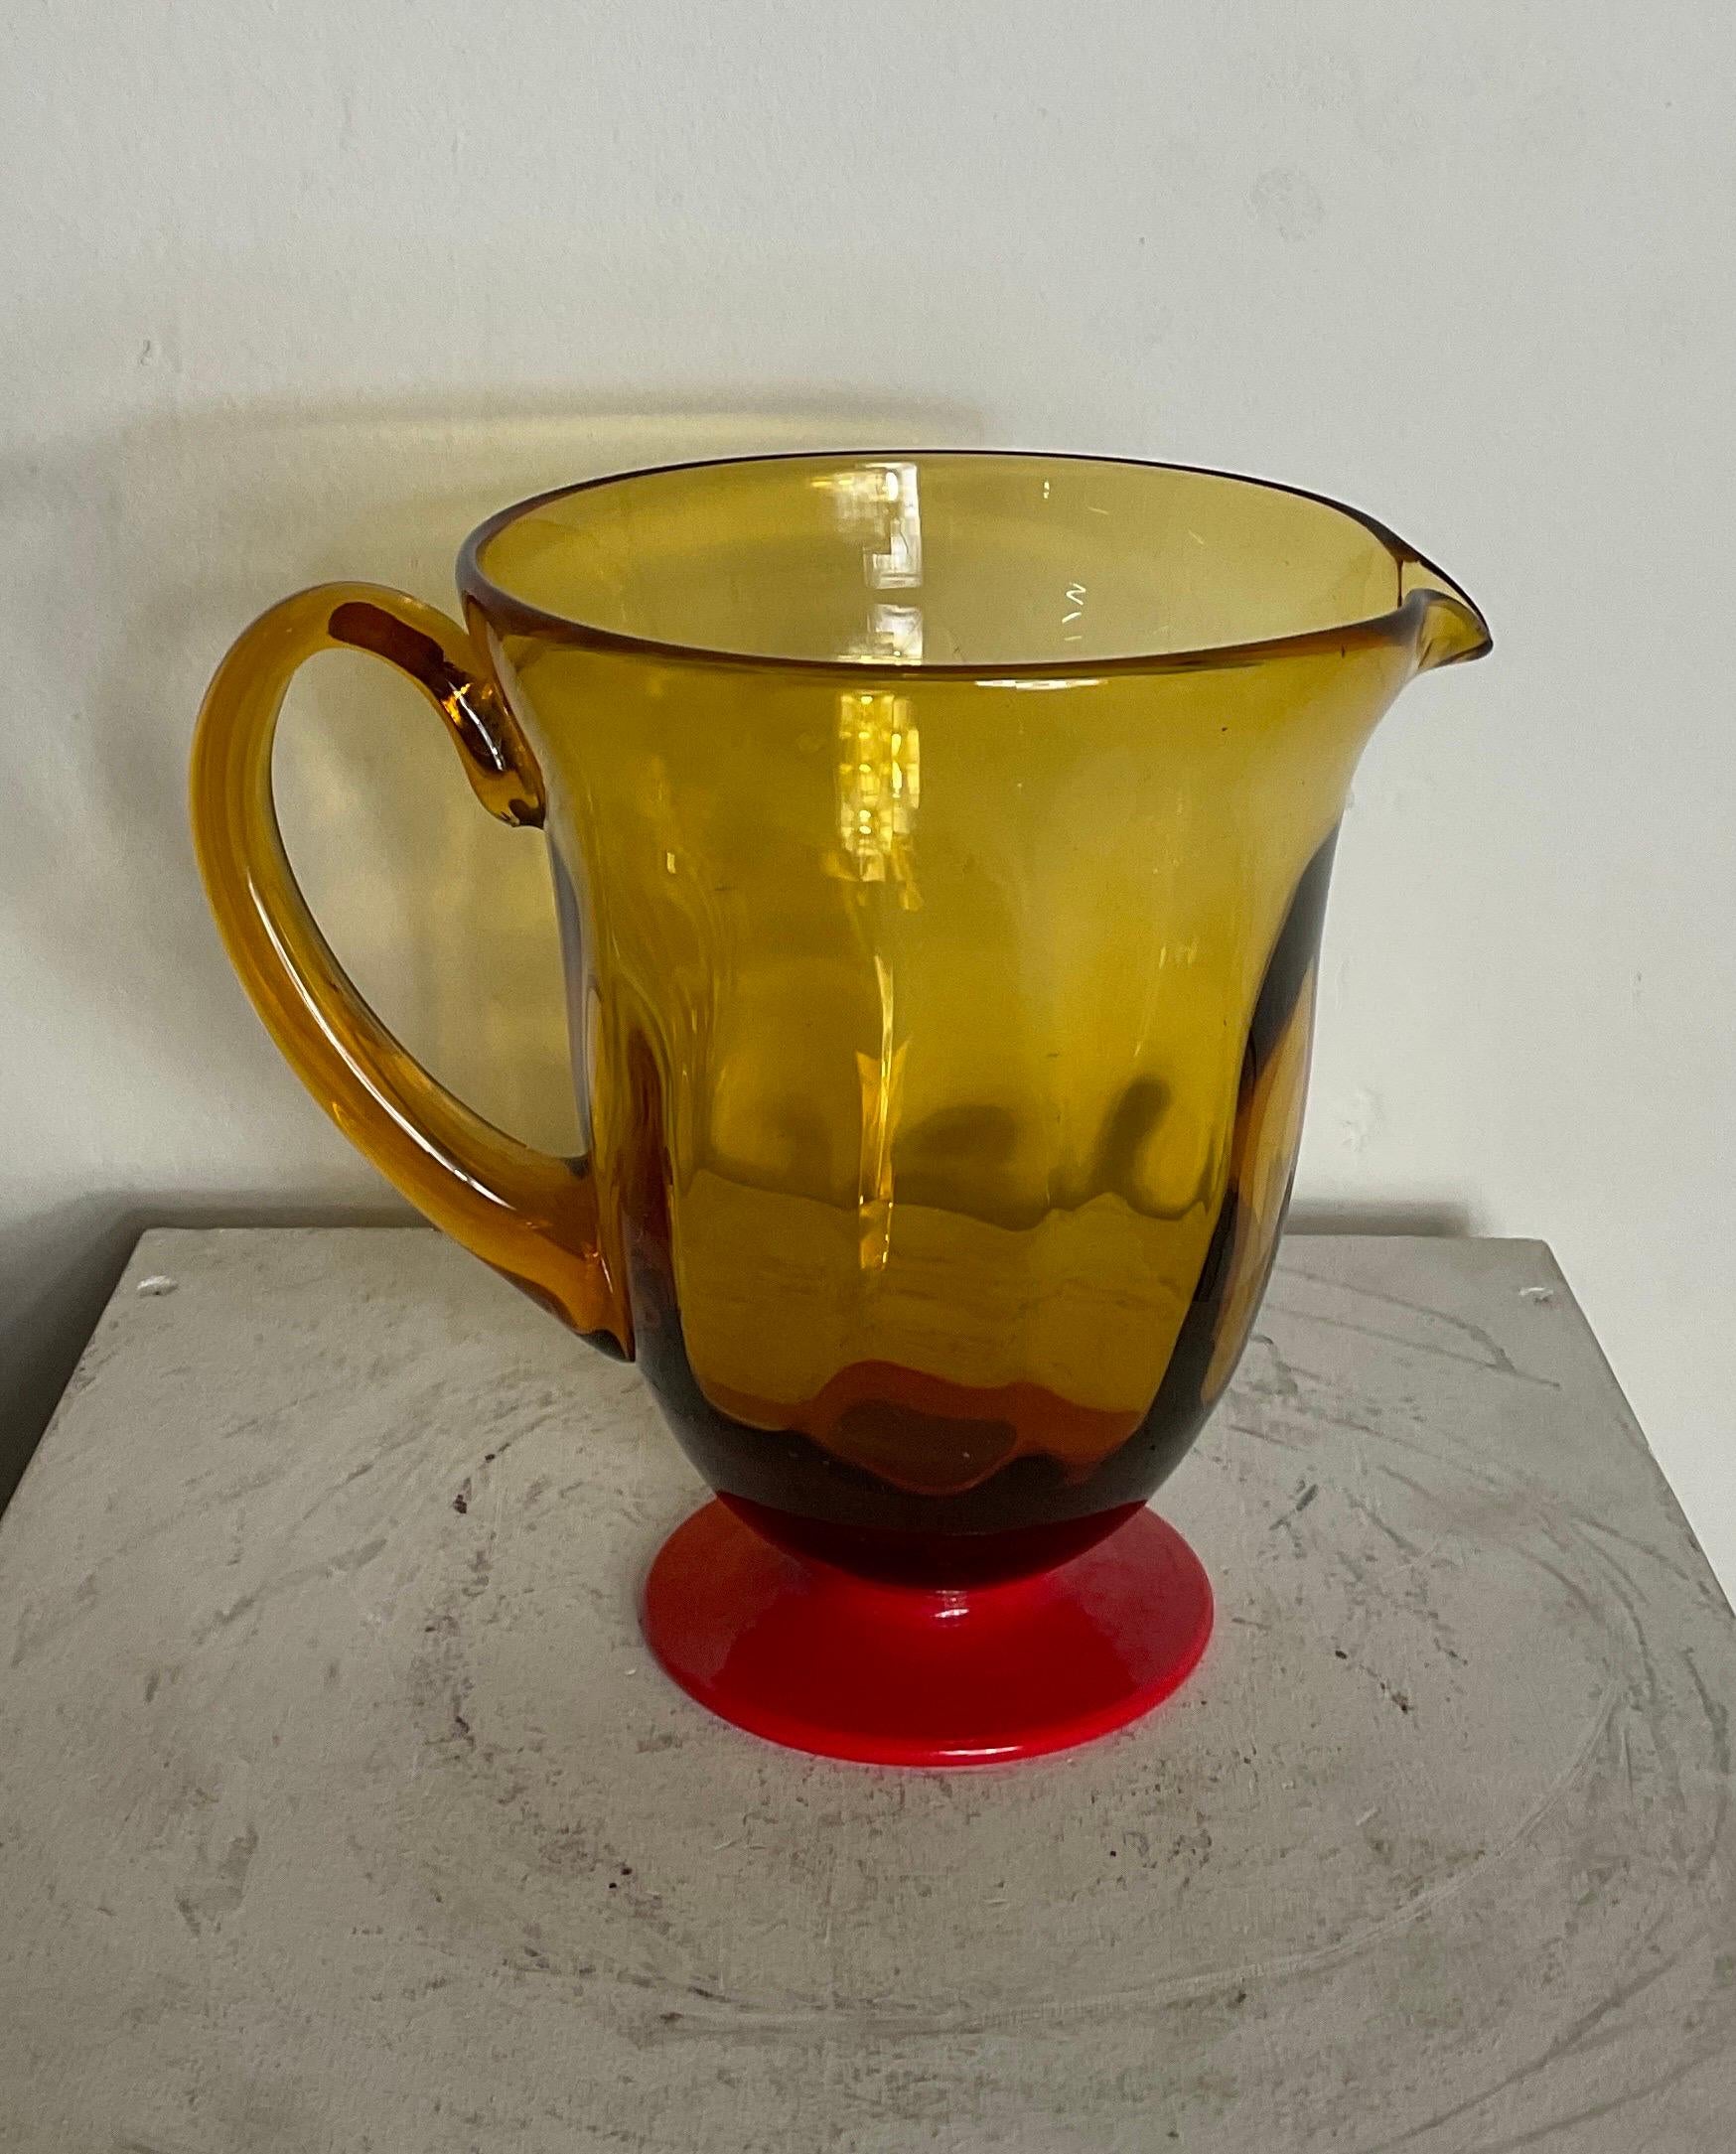 Murano glass pitcher of orange colour attributable to Vittorio Zecchin, 1930. In good condition with wear and tear caused by use and years. Also during the thirties and in the last decade of his life, he also devoted himself to teaching,